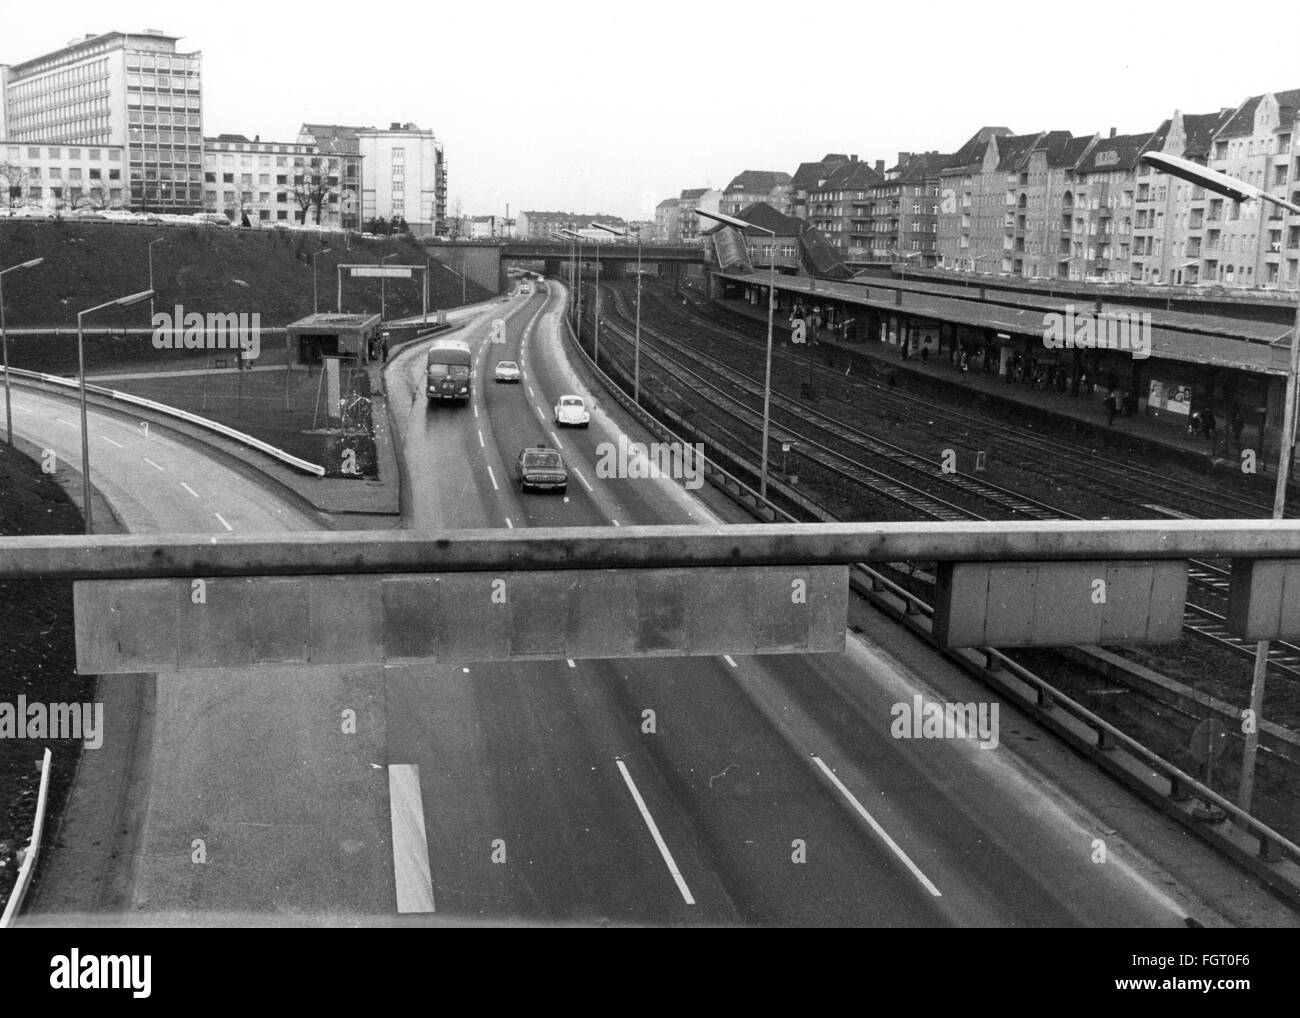 geography / travel, Germany, Berlin, transport / transportation, streets, urban motorway at railway station Messe Nord, 1971, city ring road, Autobahn, federal motorway B100, B 100, transport, transportation, road traffic, cars, car, Volkswagen, VW beetle, railroad, railways, railroads, suburban railway, suburban train, city train, house, multi-storey building, high-rise building, buildings, houses, Charlottenburg, West Berlin, 1970s, 70s, 20th century, people, streets, street, urban motorway, urban motorways, historic, historical, Additional-Rights-Clearences-Not Available Stock Photo